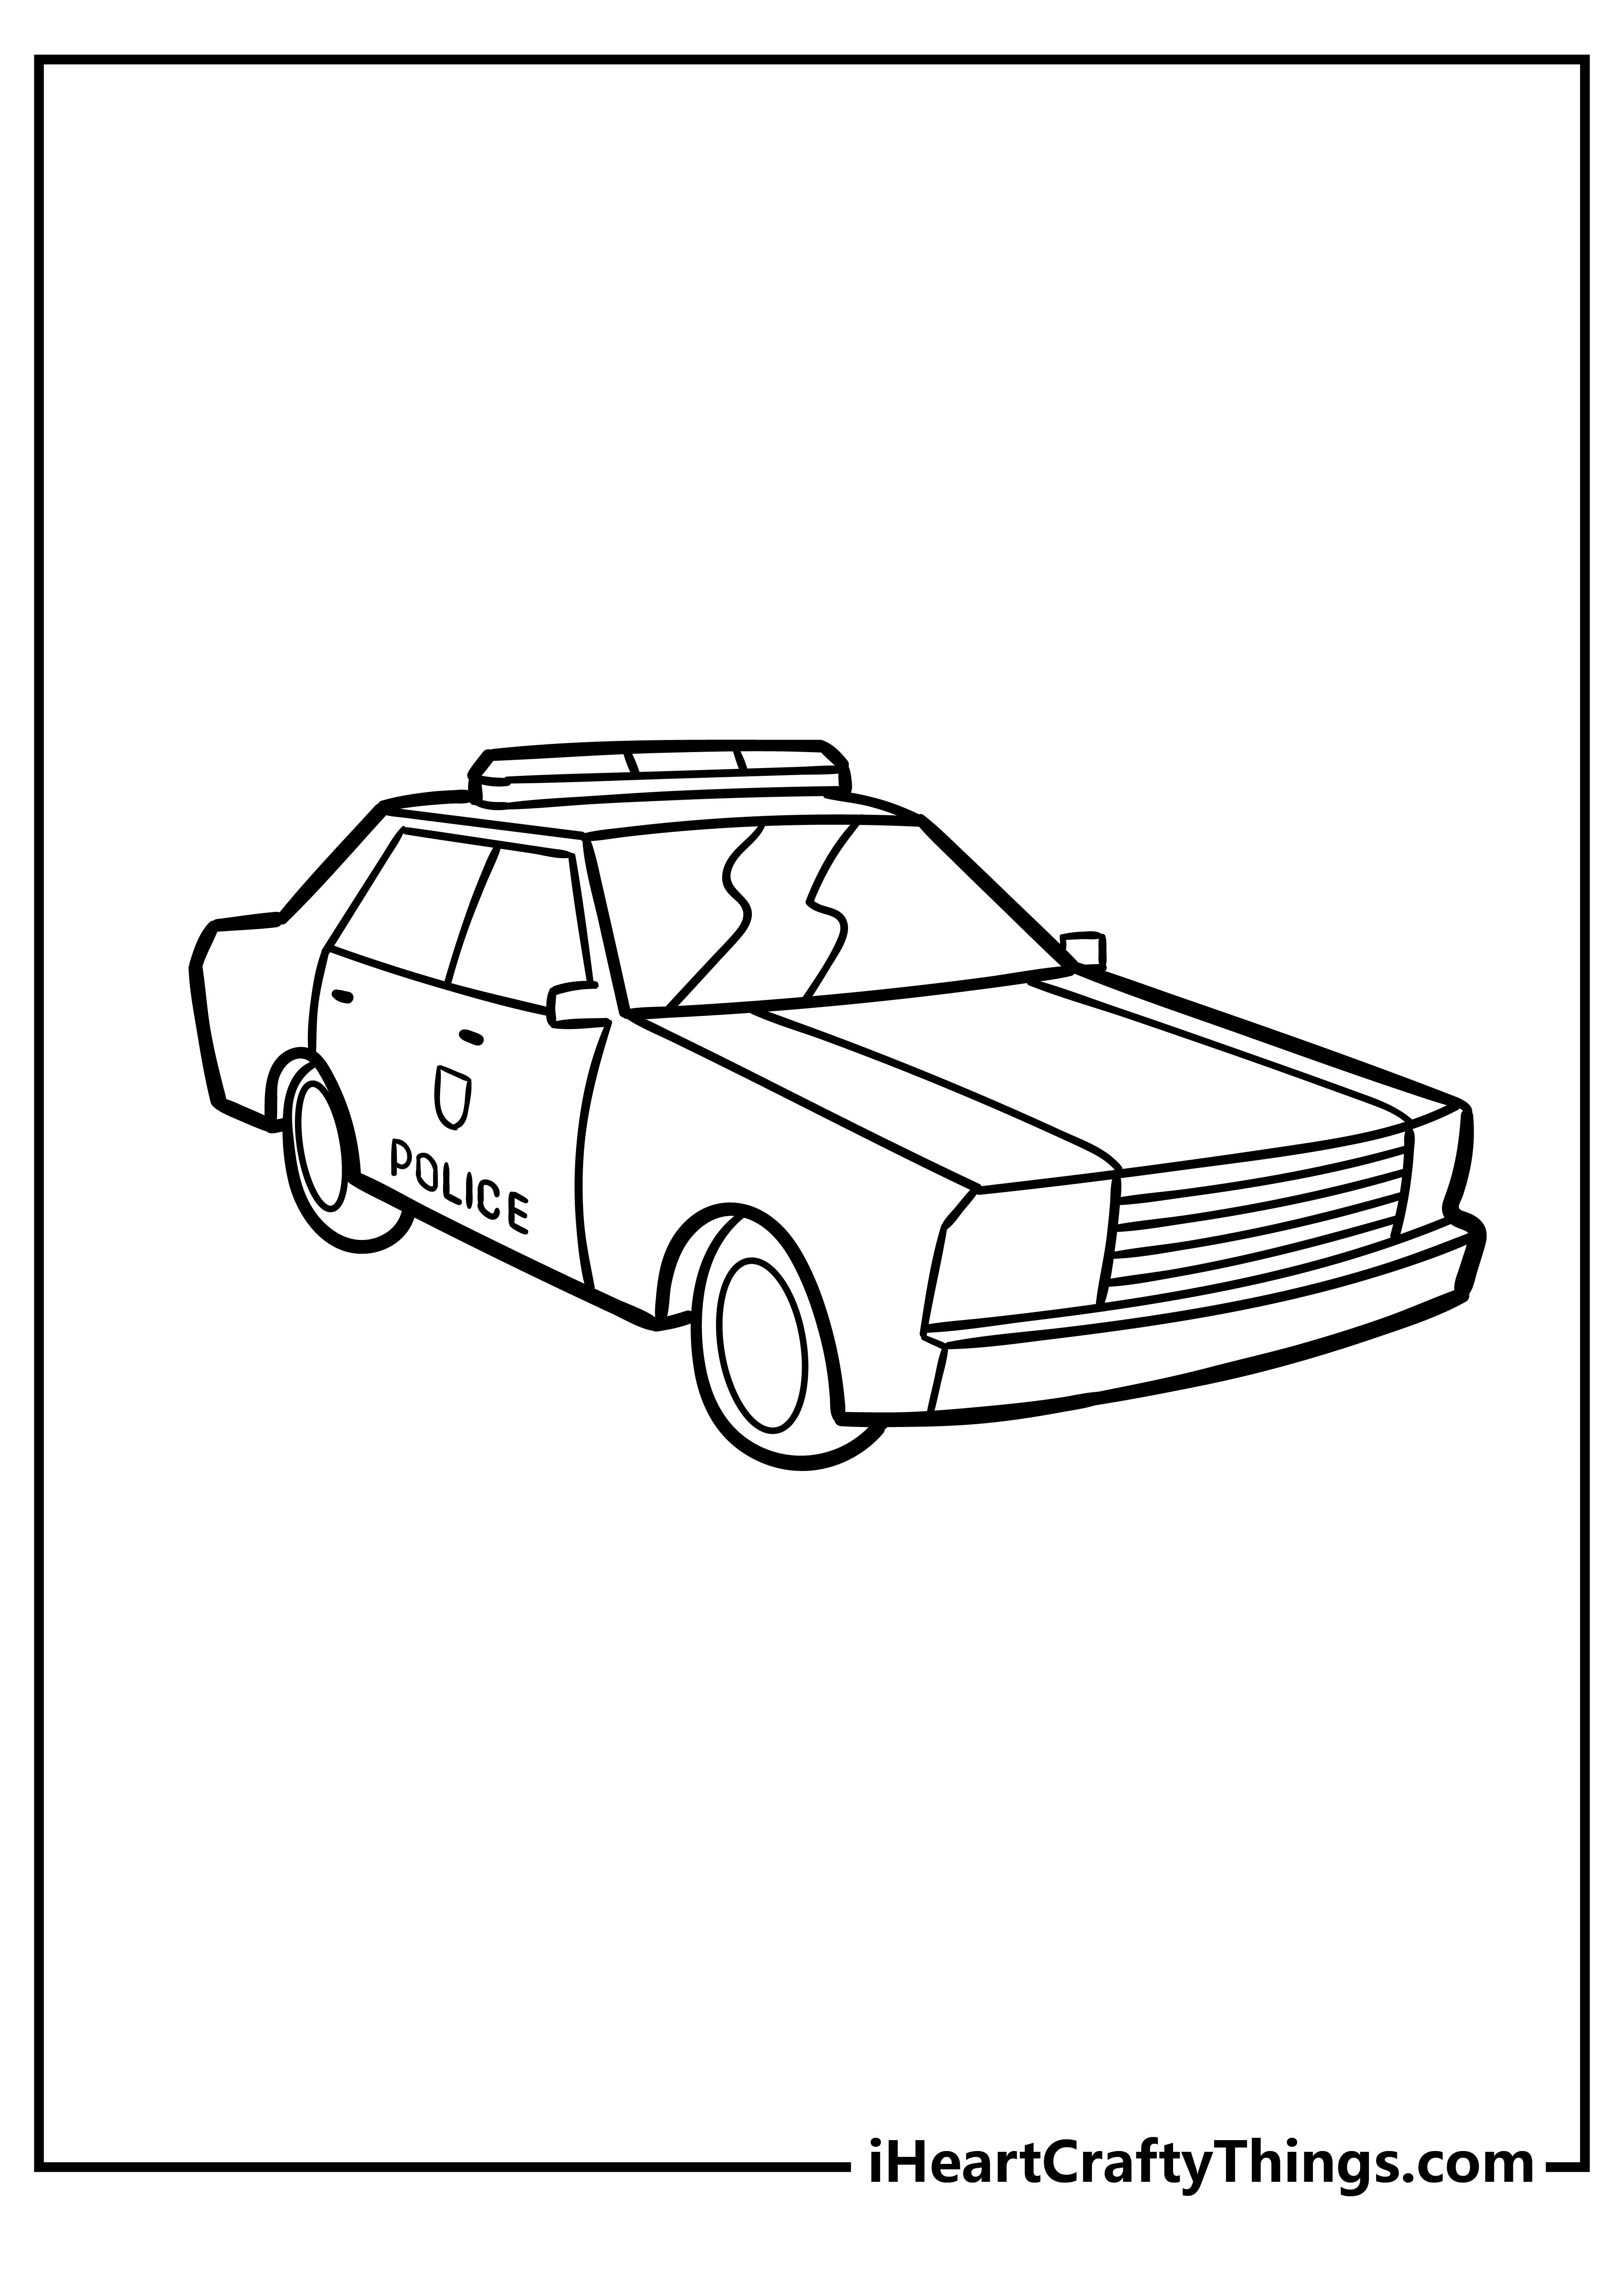 Police Car Coloring Book for kids free printable